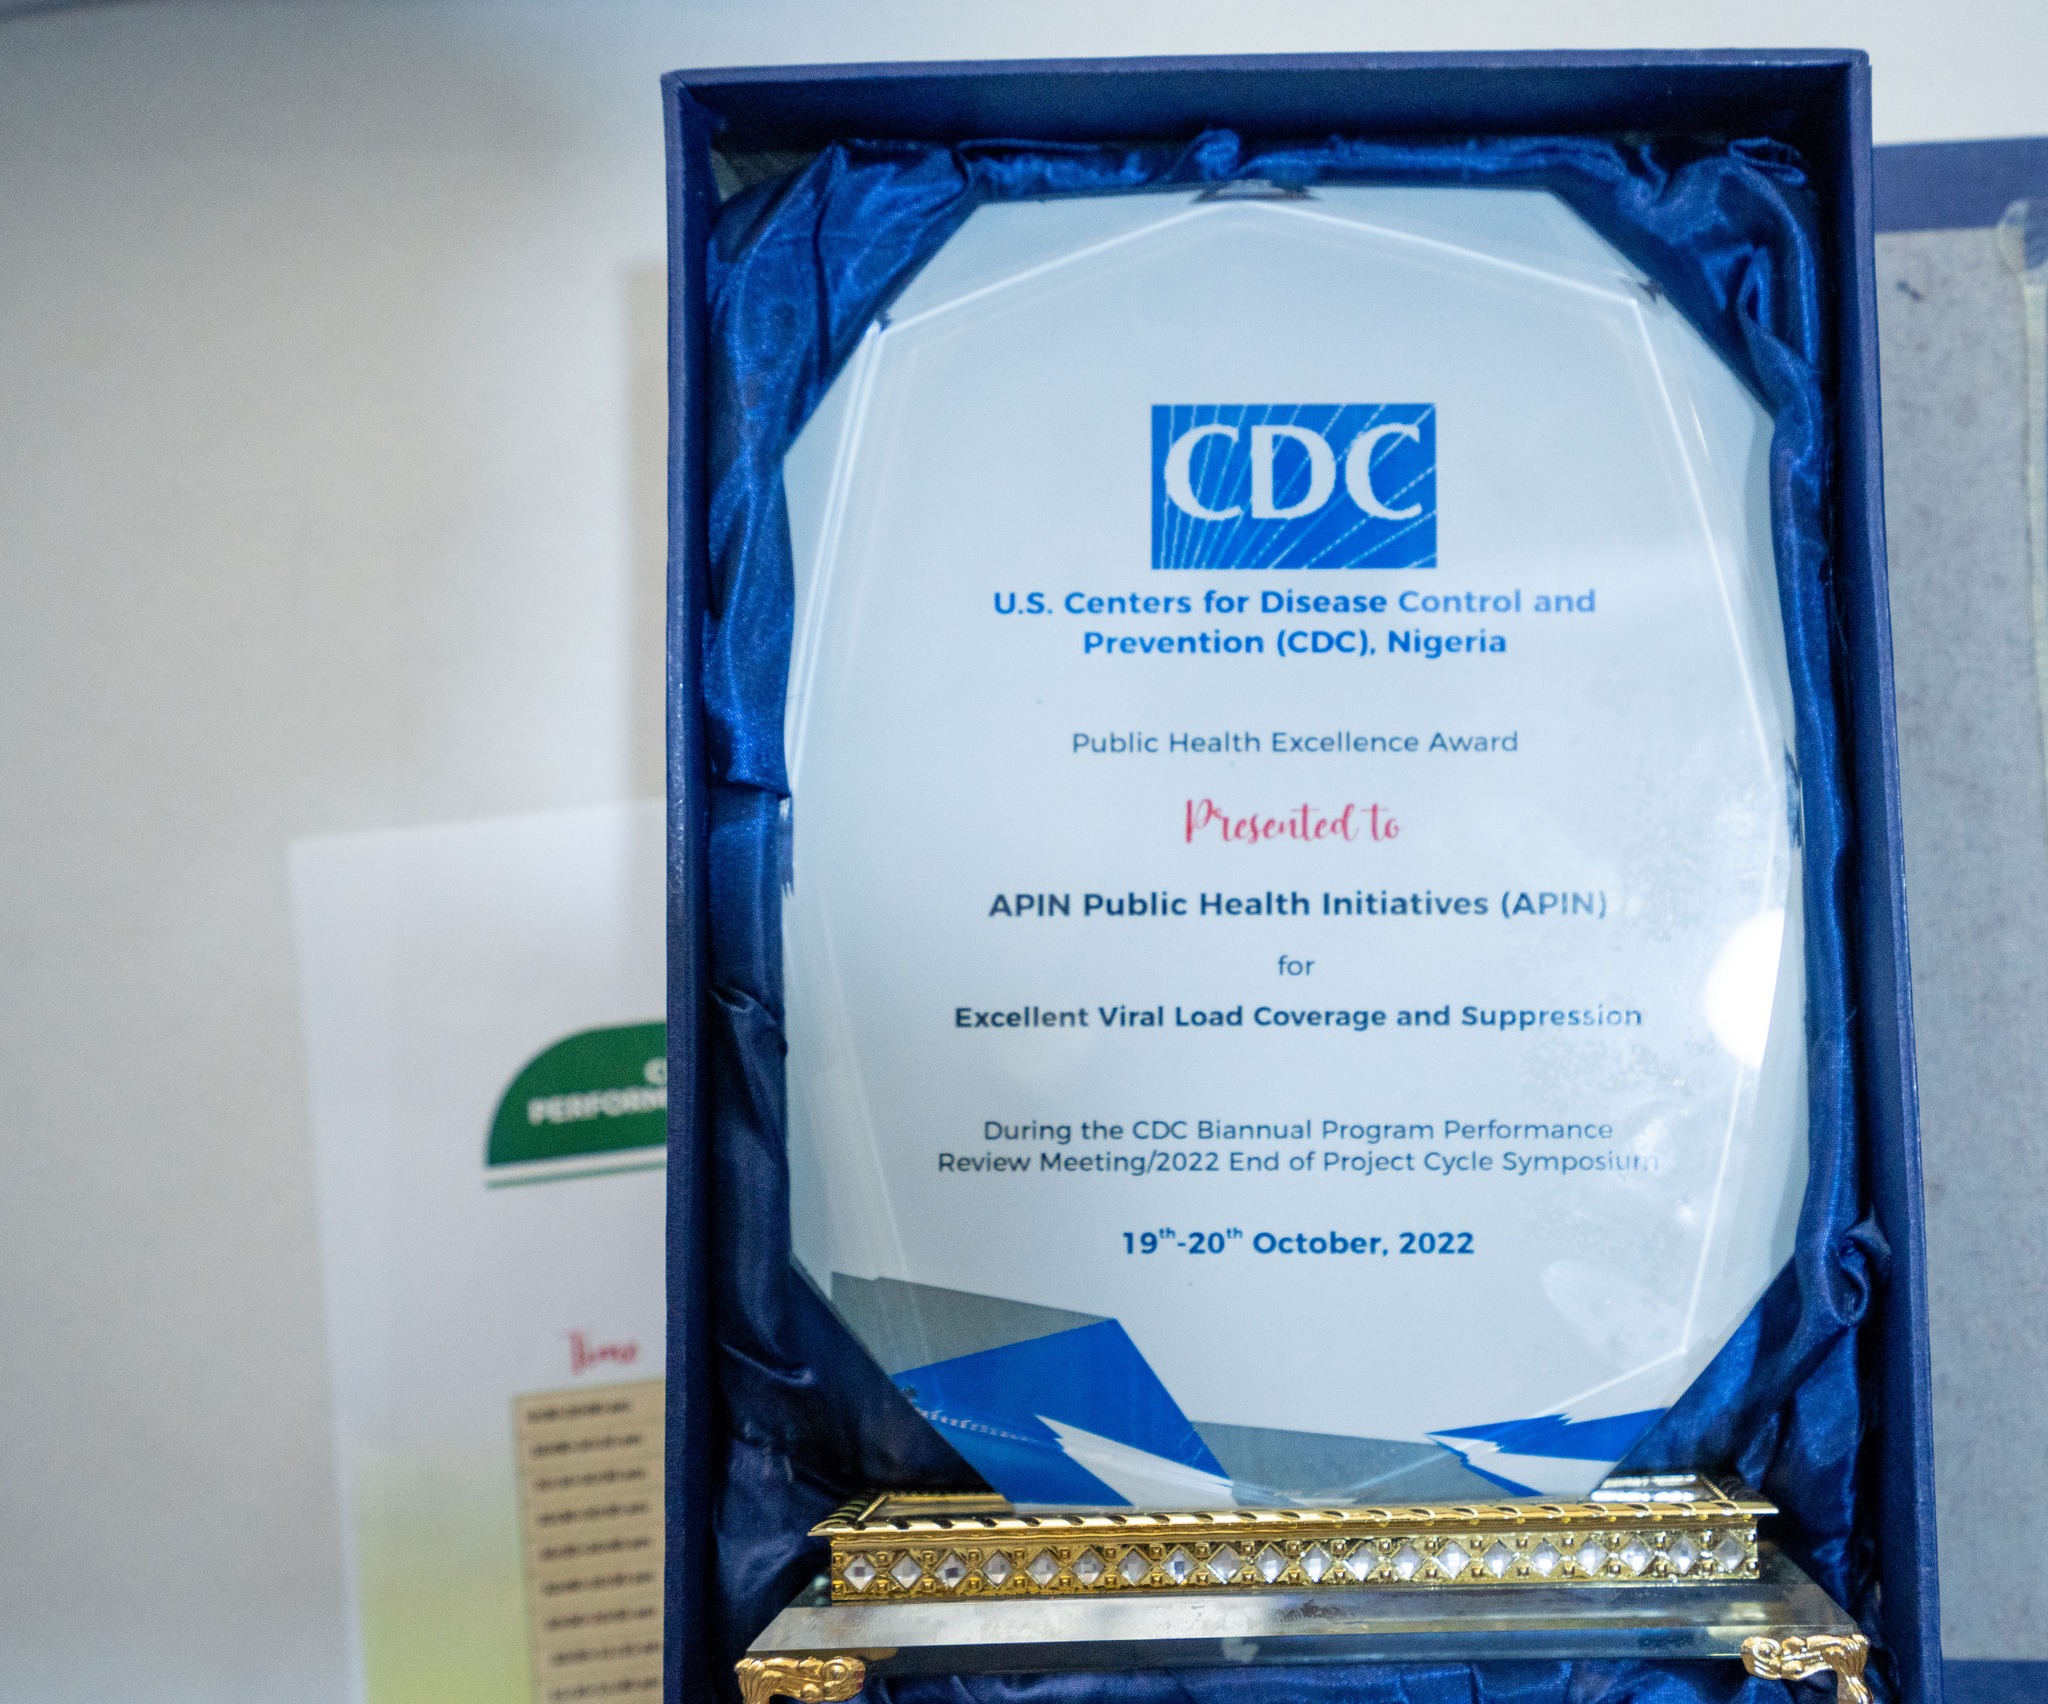 APIN Wins Two Awards at the CDC Biannual Program Performance Review meeting/2022 End of Project Cycle!